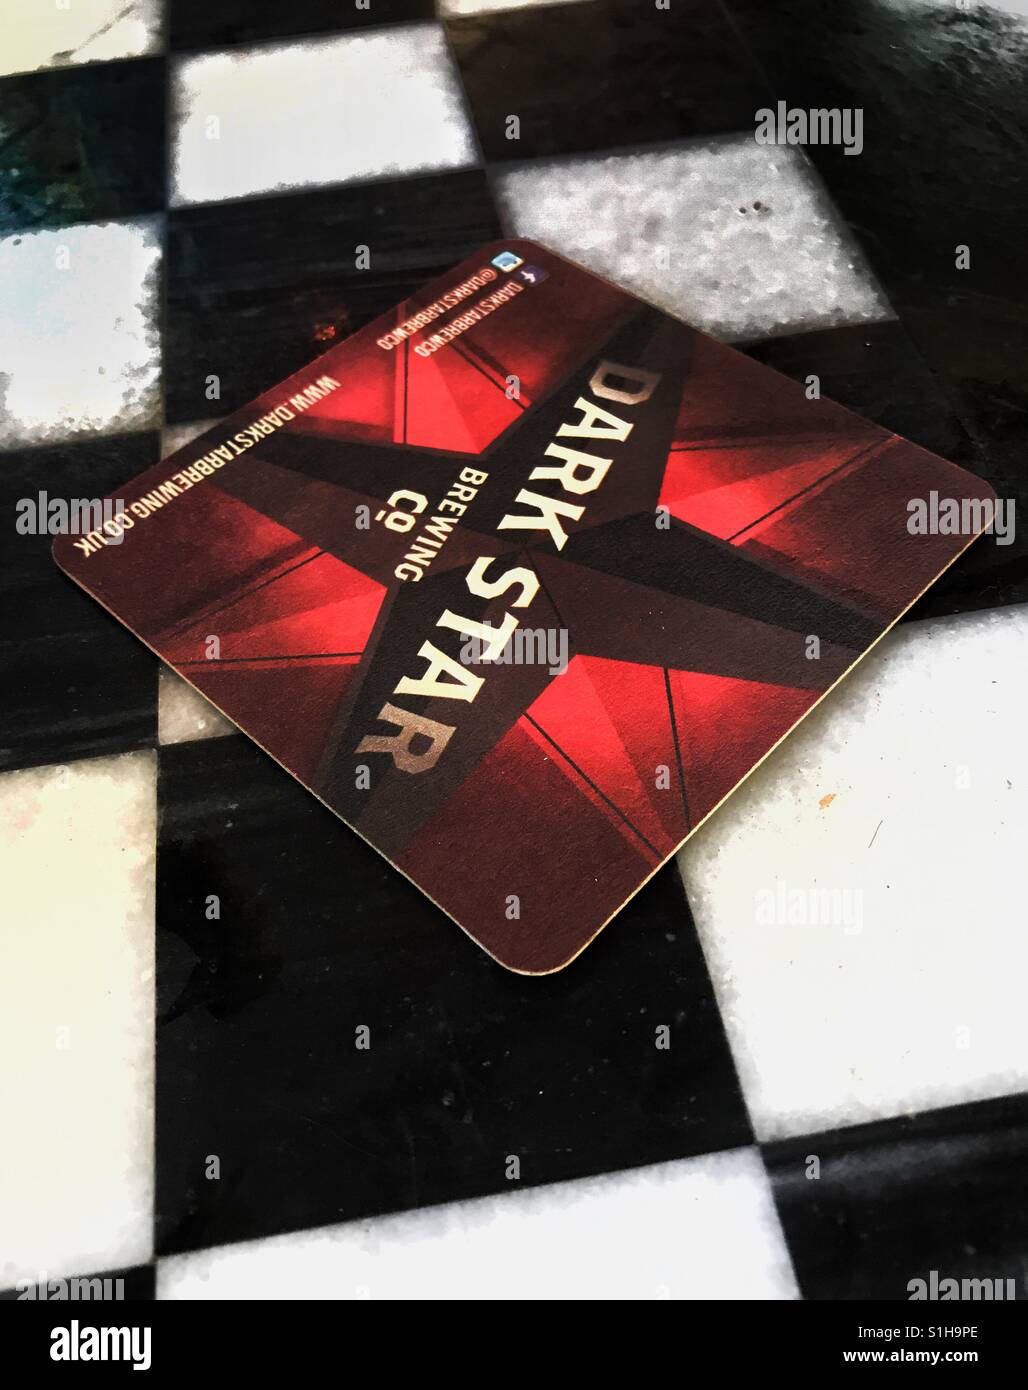 Dark Star beer mat on black and white chequered table Stock Photo